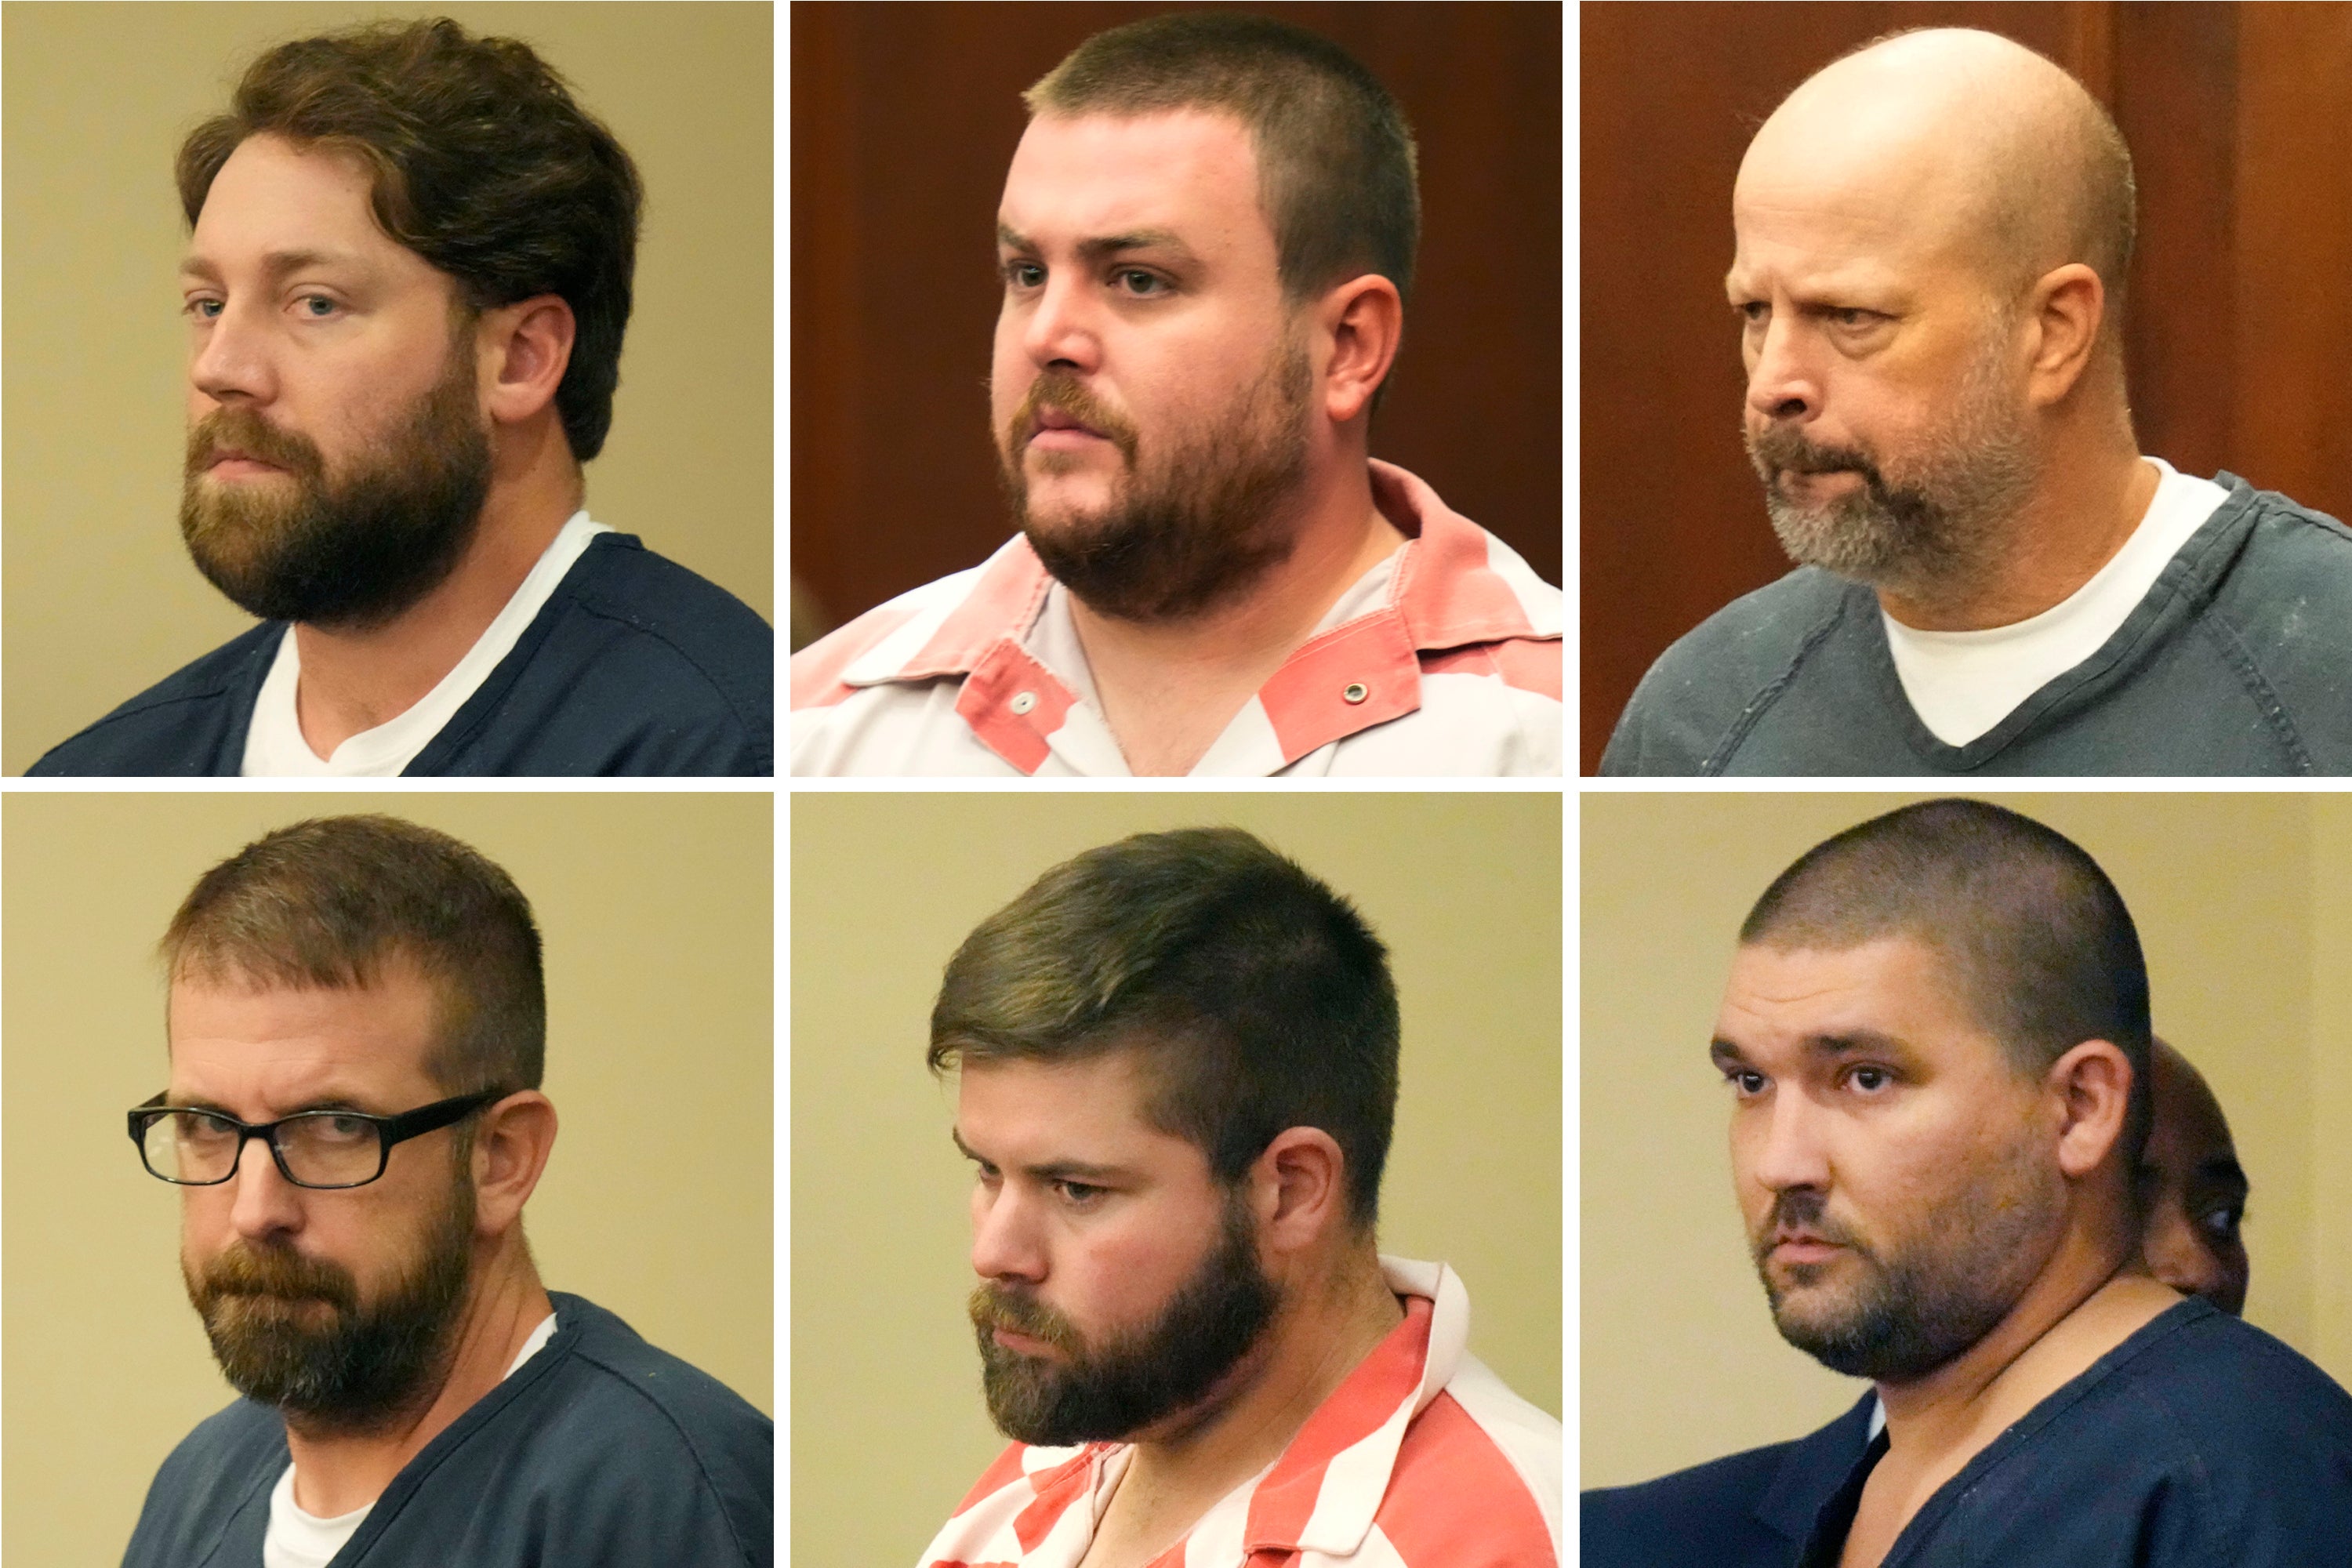 This combination of photos shows, from top left, former Rankin County sheriff's deputies Hunter Elward, Christian Dedmon, Brett McAlpin, Jeffrey Middleton, Daniel Opdyke and former Richland police officer Joshua Hartfield appearing at the Rankin County Circuit Court in Brandon, Mississippi on 14 August 2023